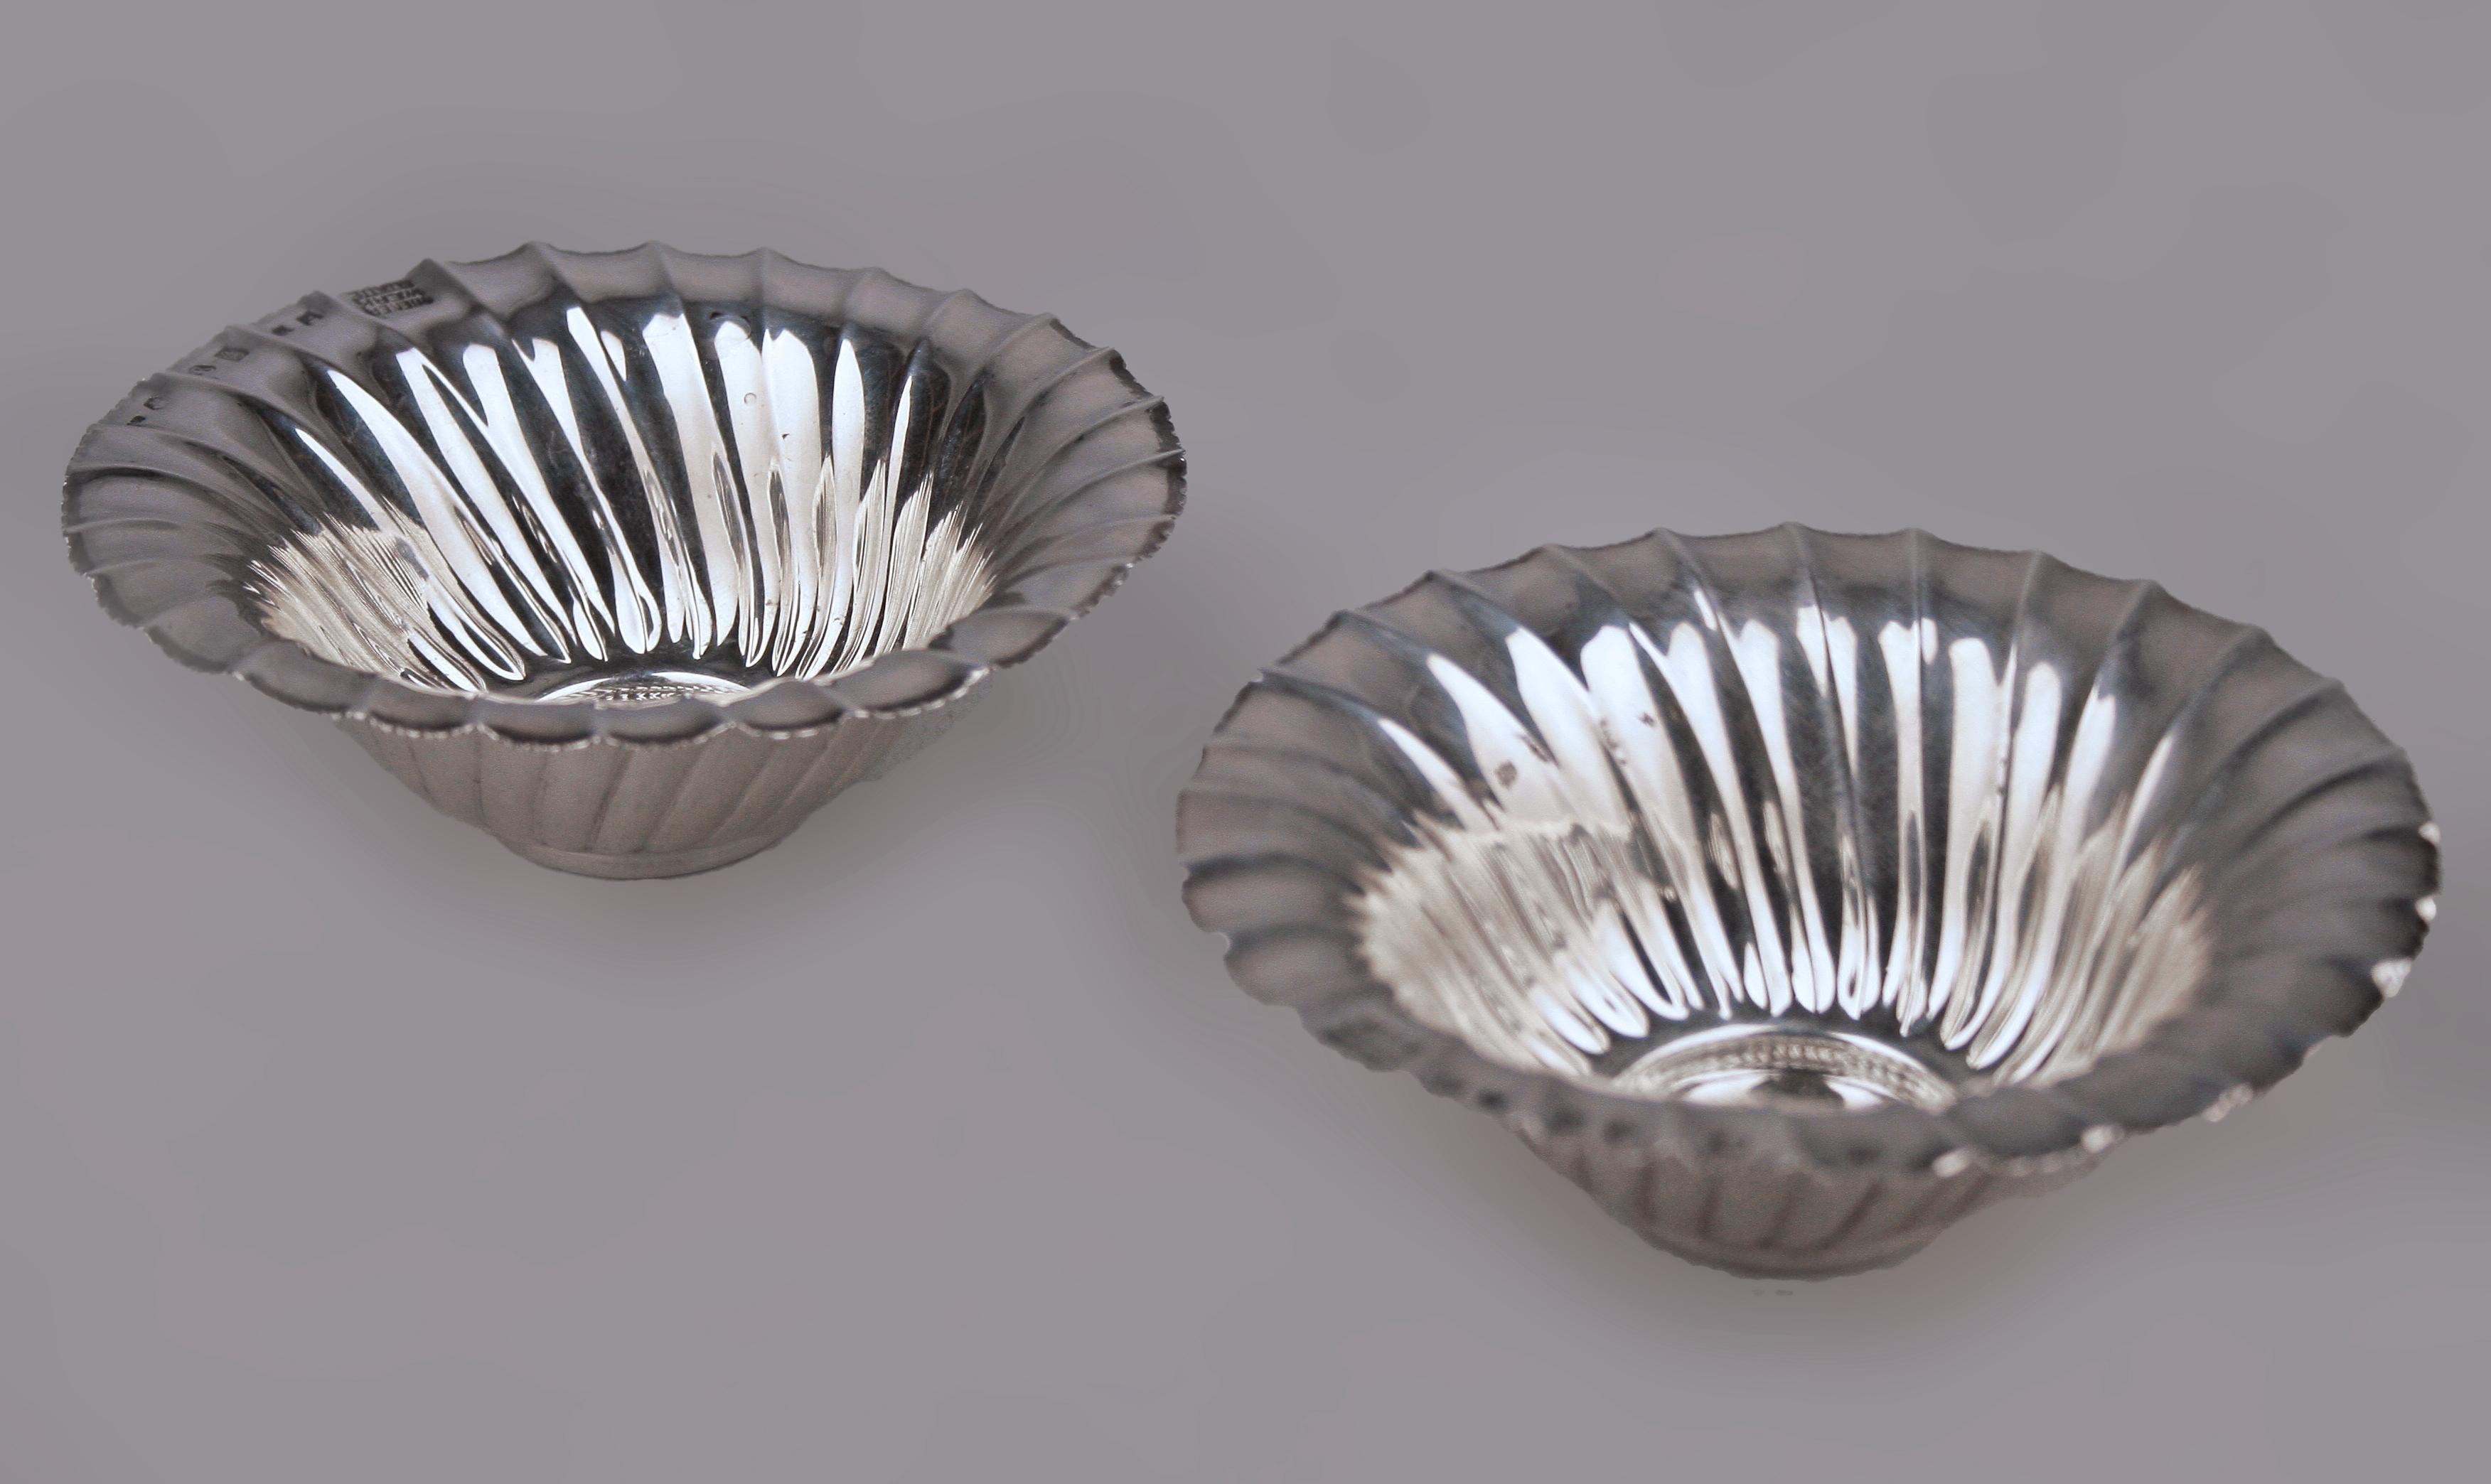 Pair of Art Nouveau polished silver bowls by Josef Hoffmann for Wiener Werkstätte

By: Josef Hoffmann, Wiener Werkstätte
Material: silver, silverplate, metal
Technique: embossed, plated, silvered, polished, metalwork
Dimensions: 4.5 in x 1.5